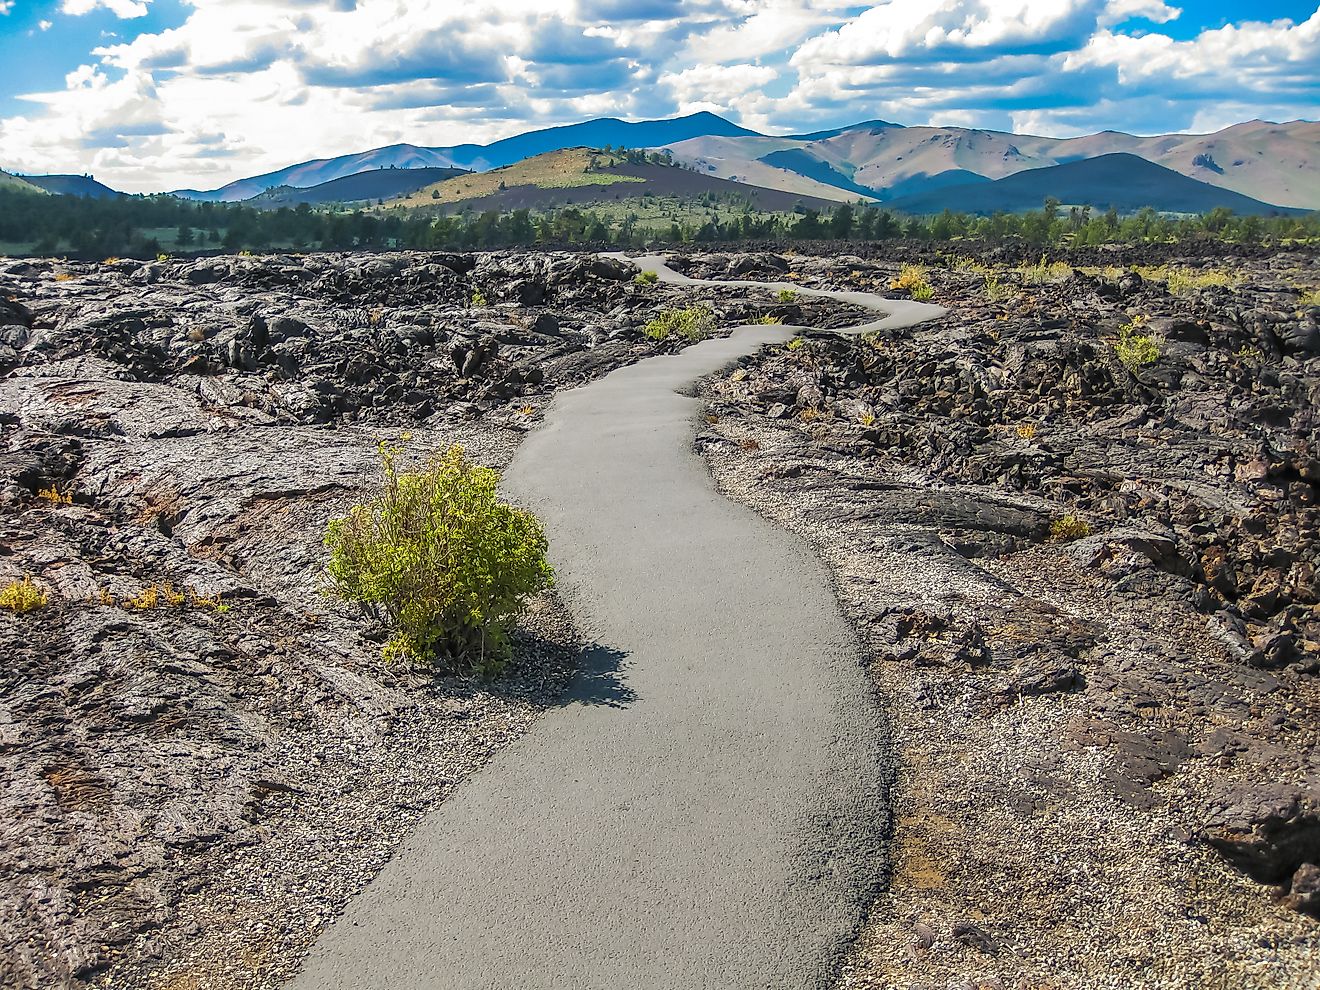 The Craters of the Moon National Monument and Preserve is unique for its lava fields. 